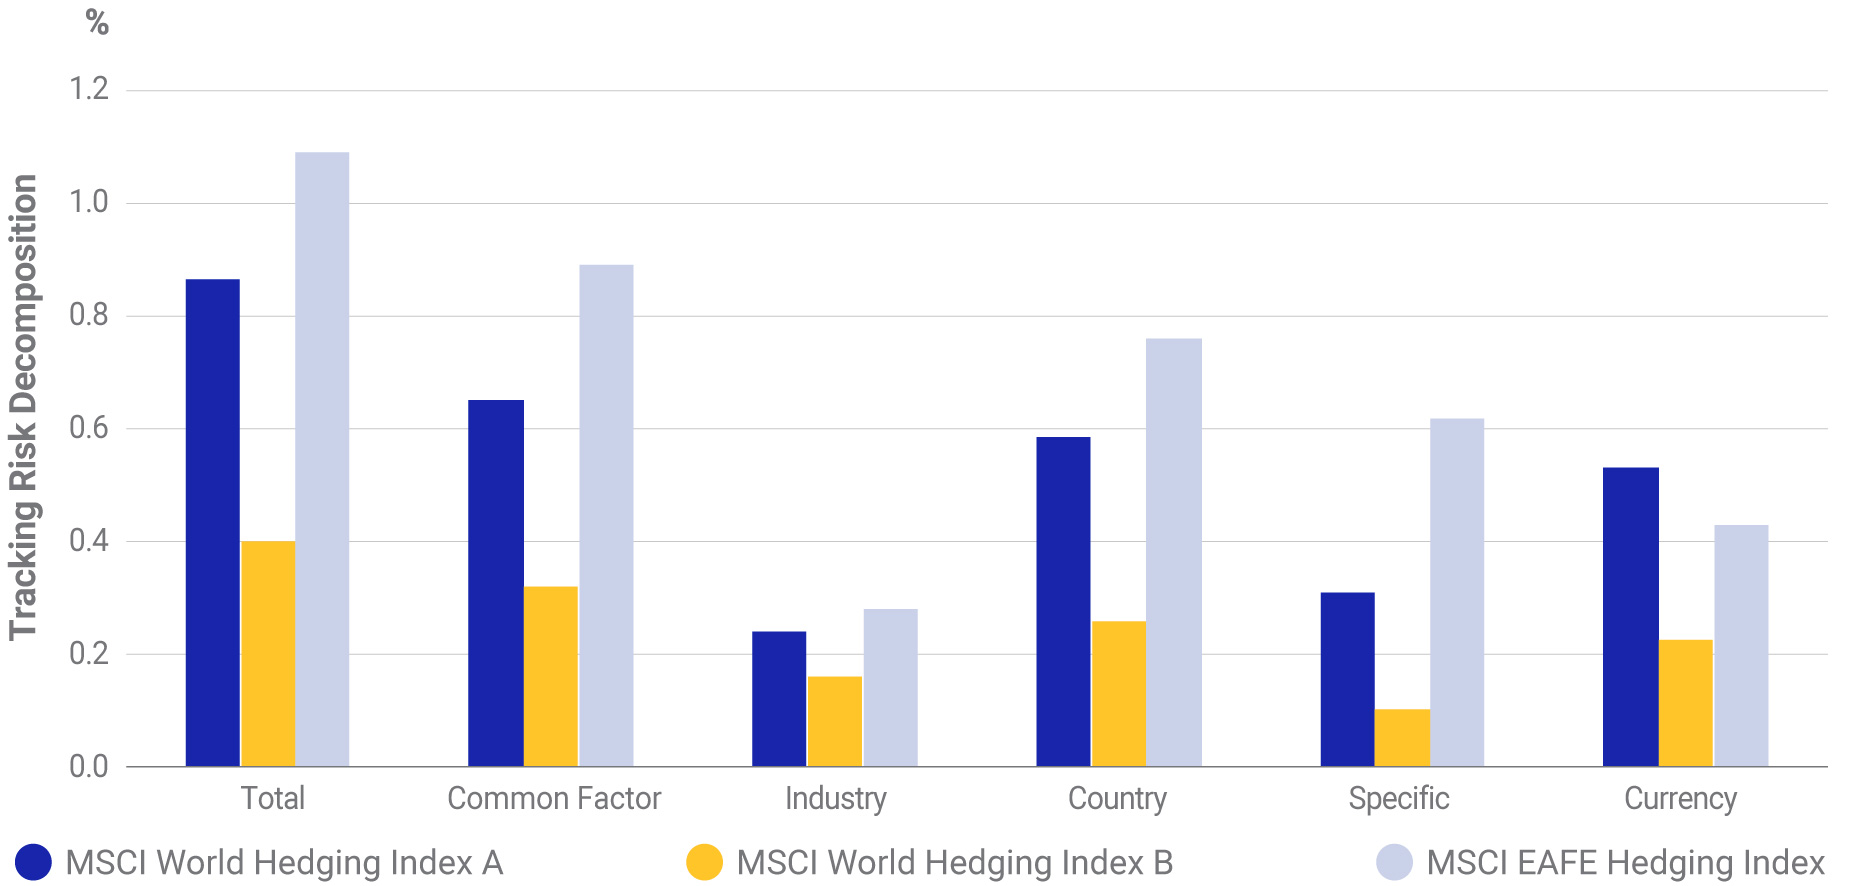 The increased tracking error of the MSCI EAFE Index replication relative to the MSCI World Index replication. 